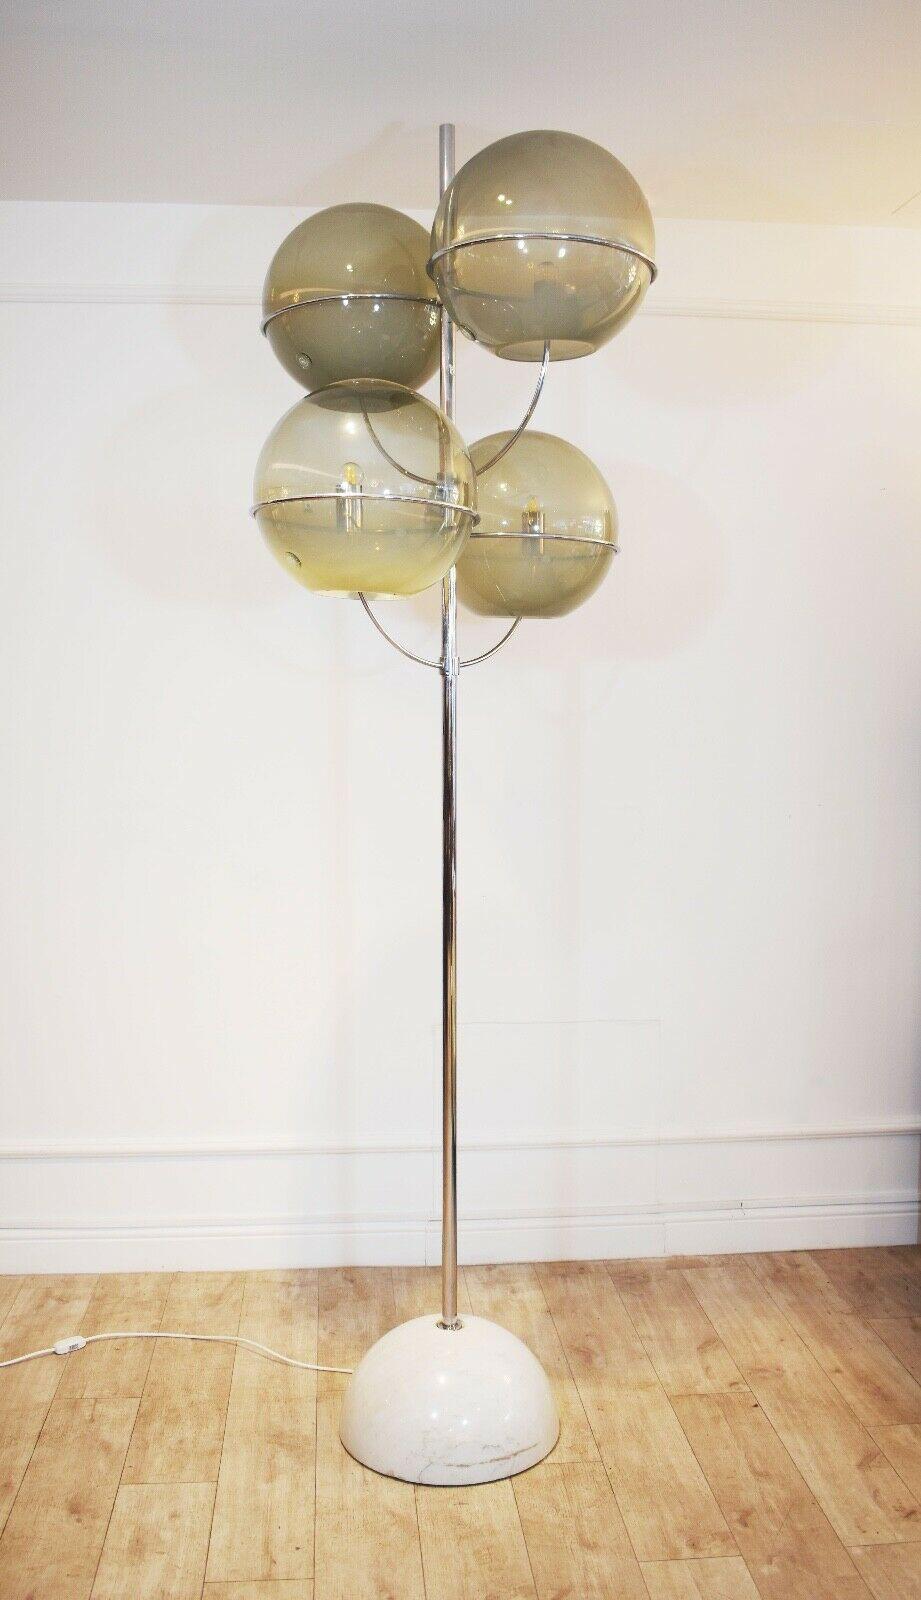 This is an extremely rare original floor lamp by Vico Magistretti for Knoll International, named the 'Colleoni' designed in 1968. 

With a white marble base, tubular steel and chrome-plated frame and glass each shade with applied glass seal